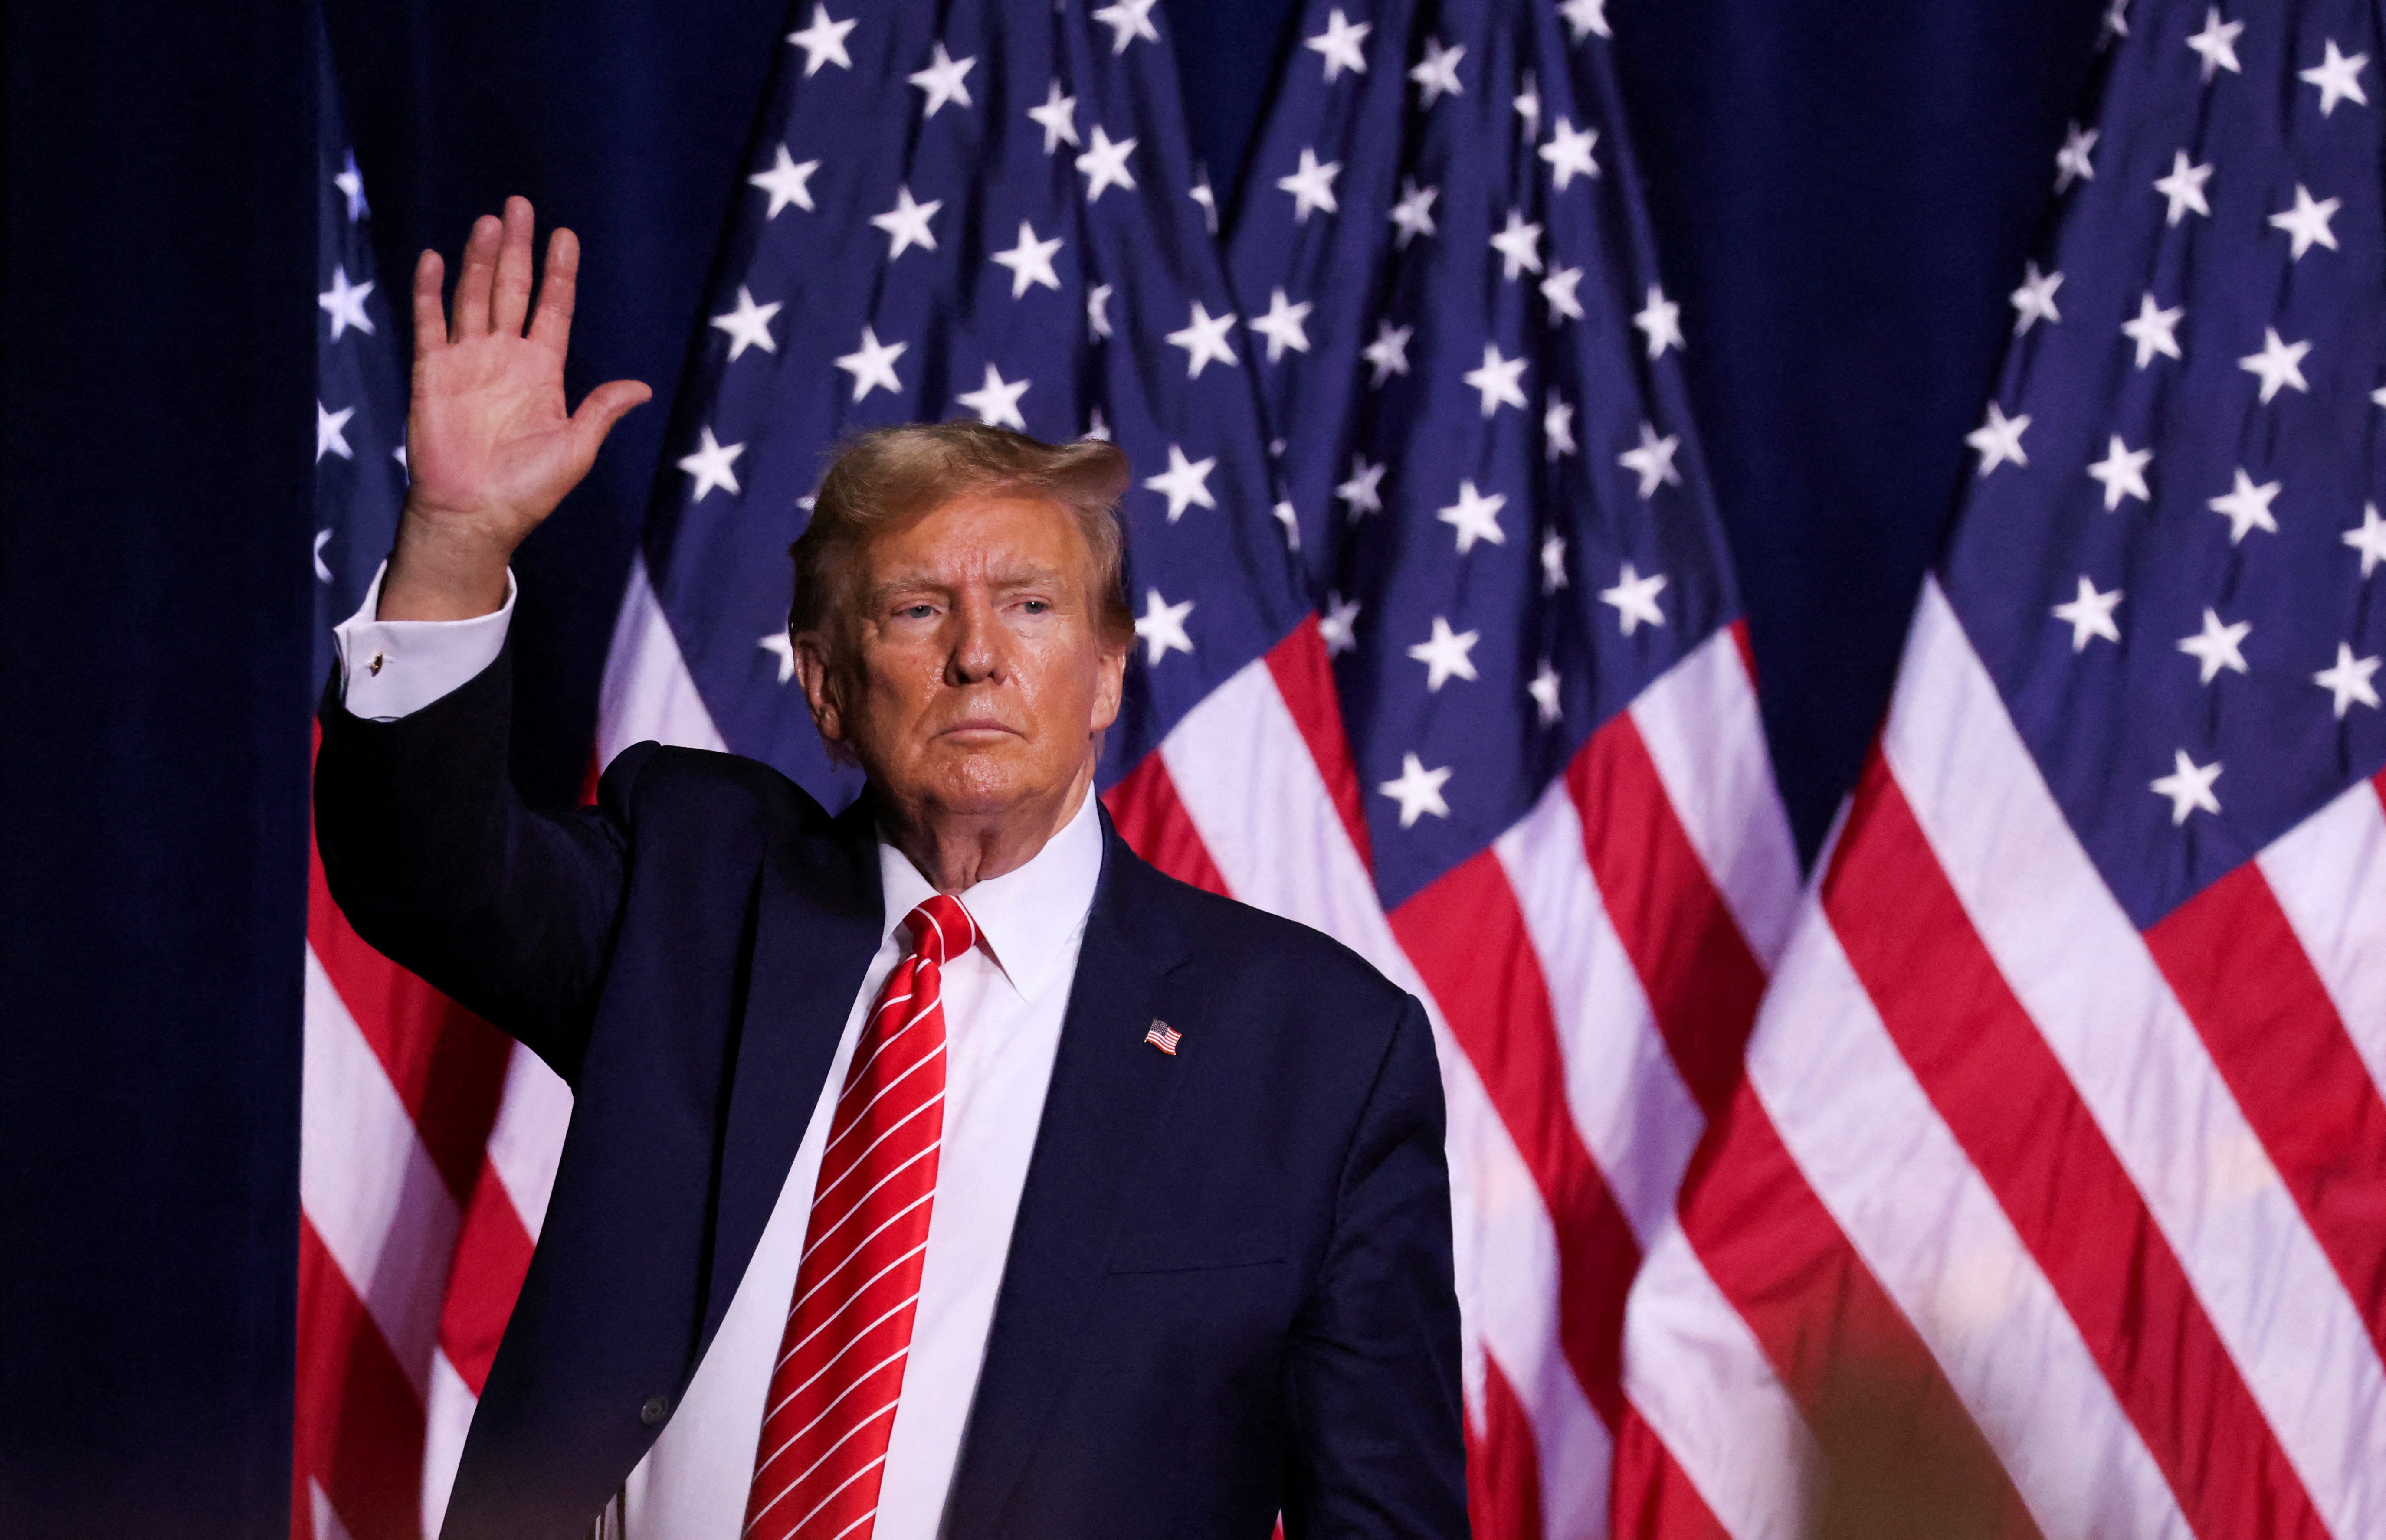 Republican presidential candidate and former U.S. President Donald Trump gestures during a campaign rally at the Forum River Center in Rome, Georgia, on March 9